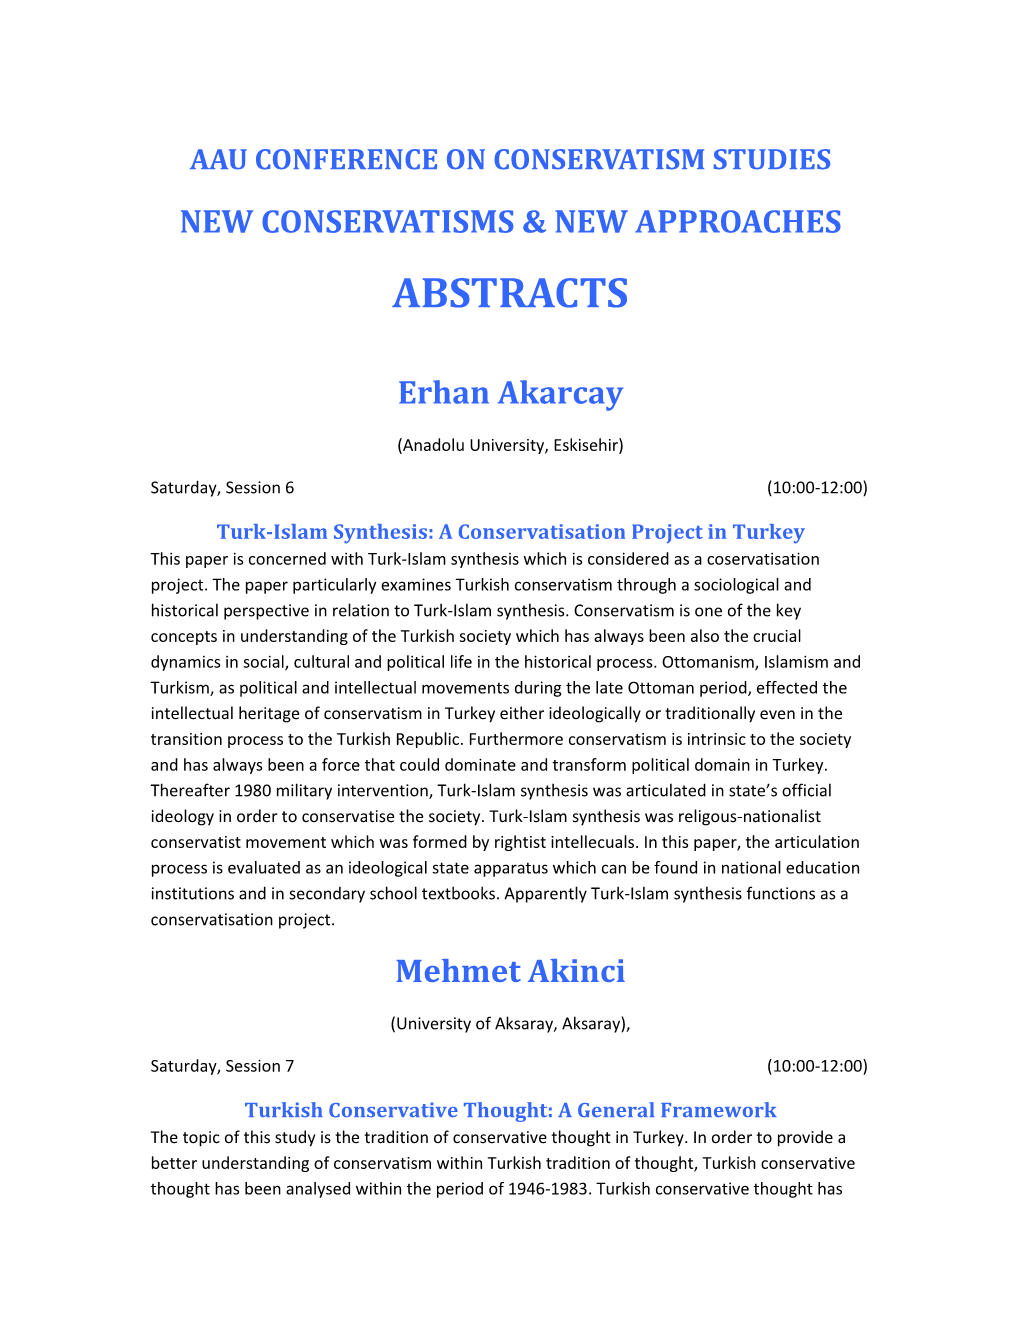 New Conservatisms & New Approaches